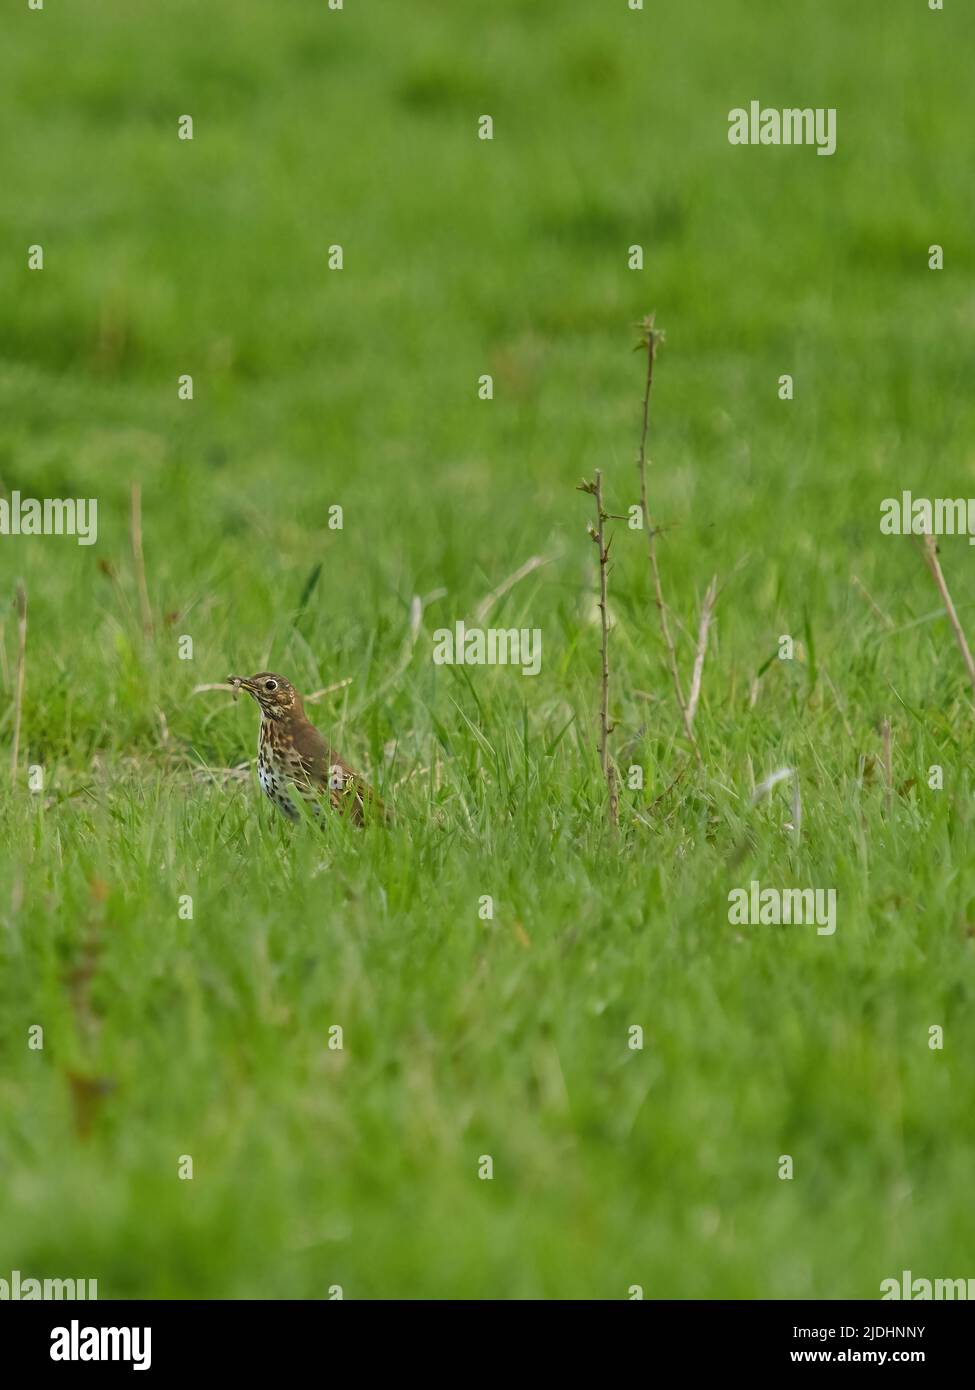 A song thrush on the hunt, foraging through a grassy field to find the invertebrates it feeds on and with a worm already caught. Stock Photo